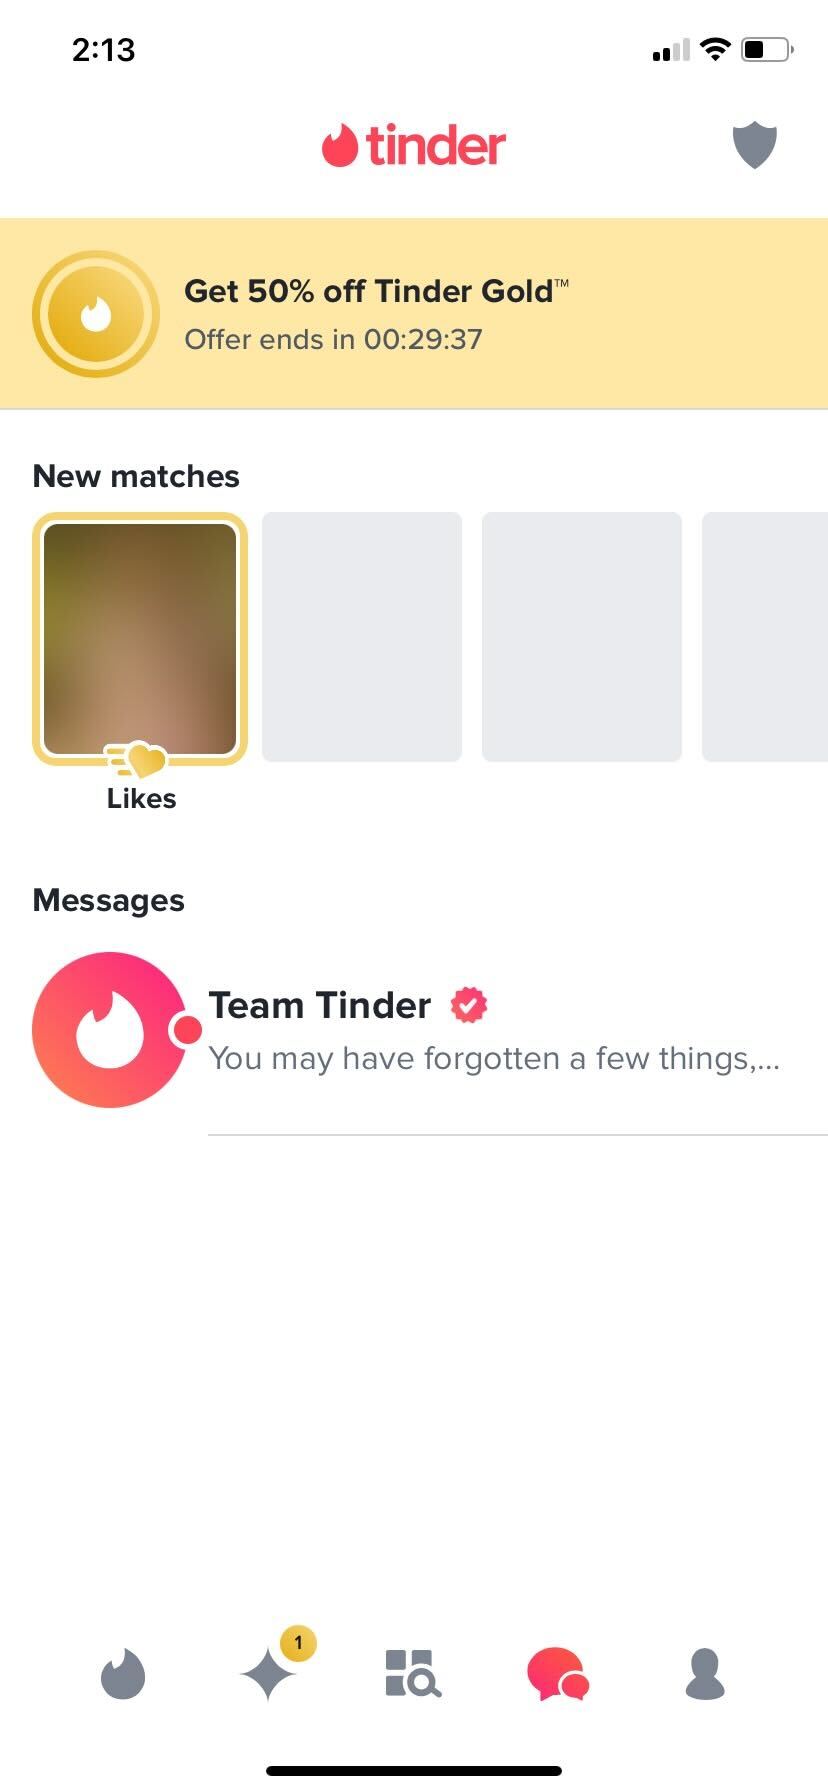 Tinder New Matches section